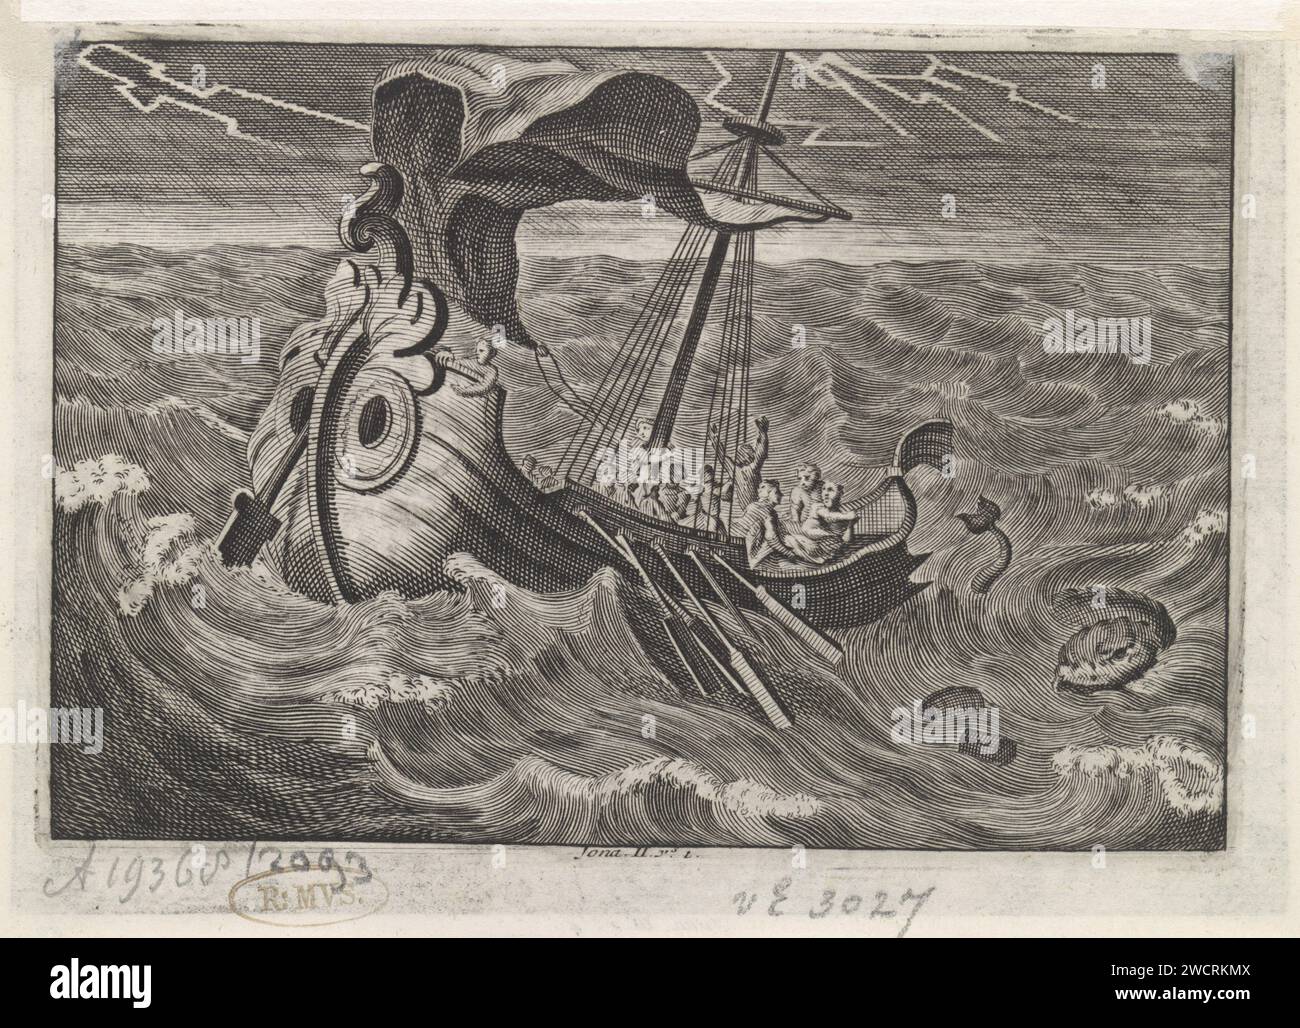 Jonah is thrown overboard by the fishermen, Jan Luyken (Possible), 1703 - 1762 print  Print Maker: Haarlem Publisher: Amsterdam paper etching / letterpress printing the sailors reluctantly throw the prophet Jonah into the sea Stock Photo